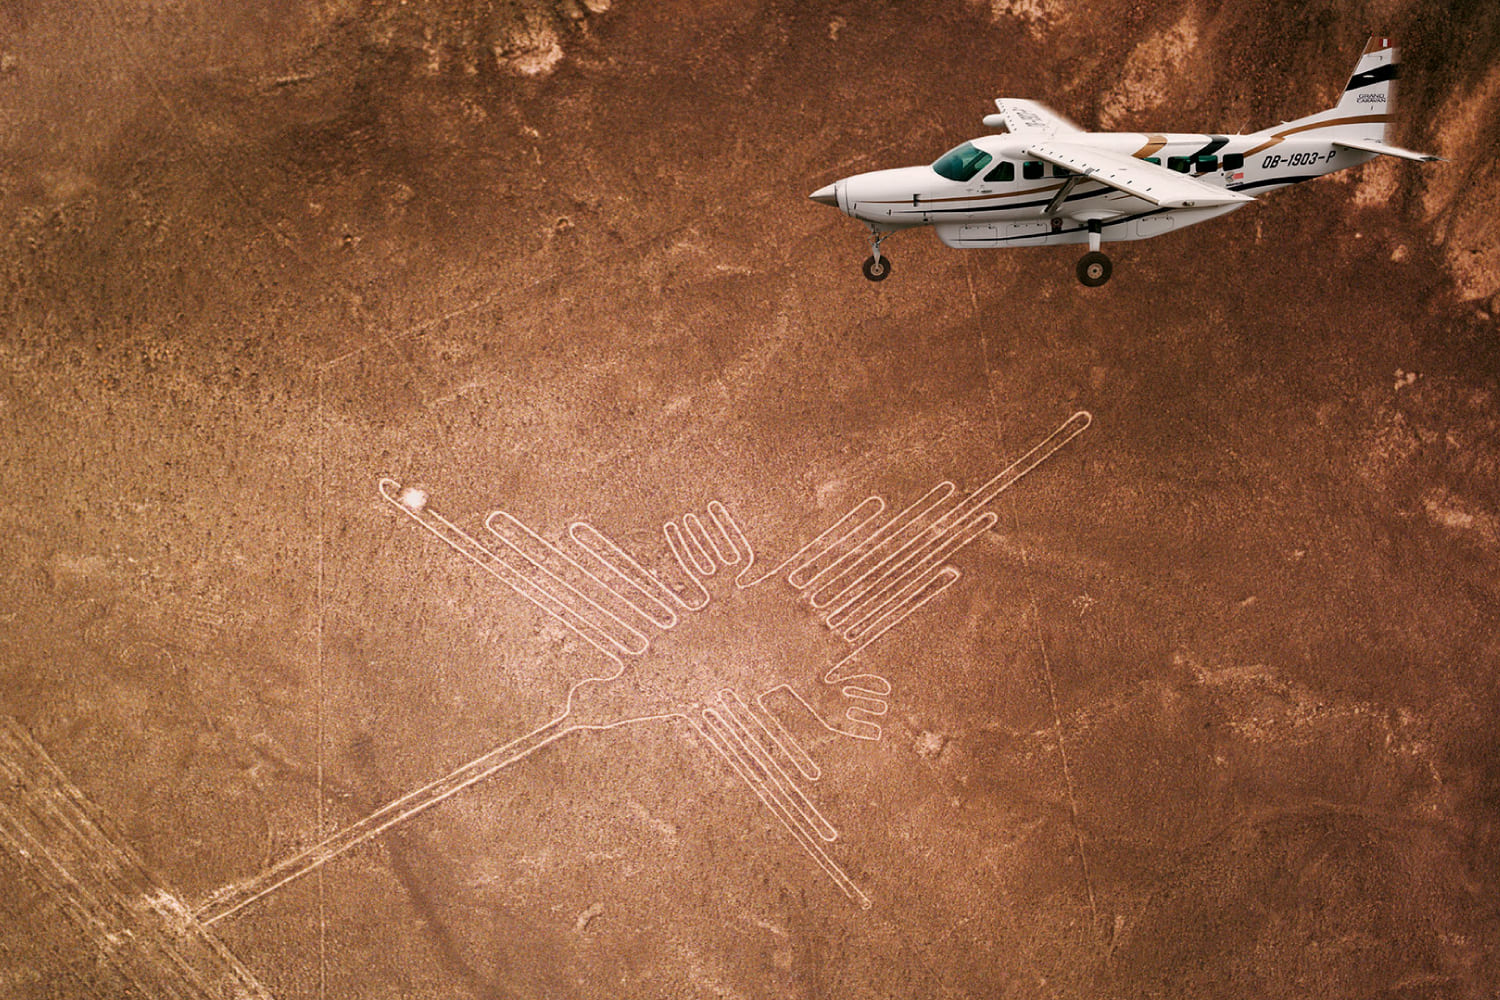 VIEWPOINTS OF THE NAZCA LINES